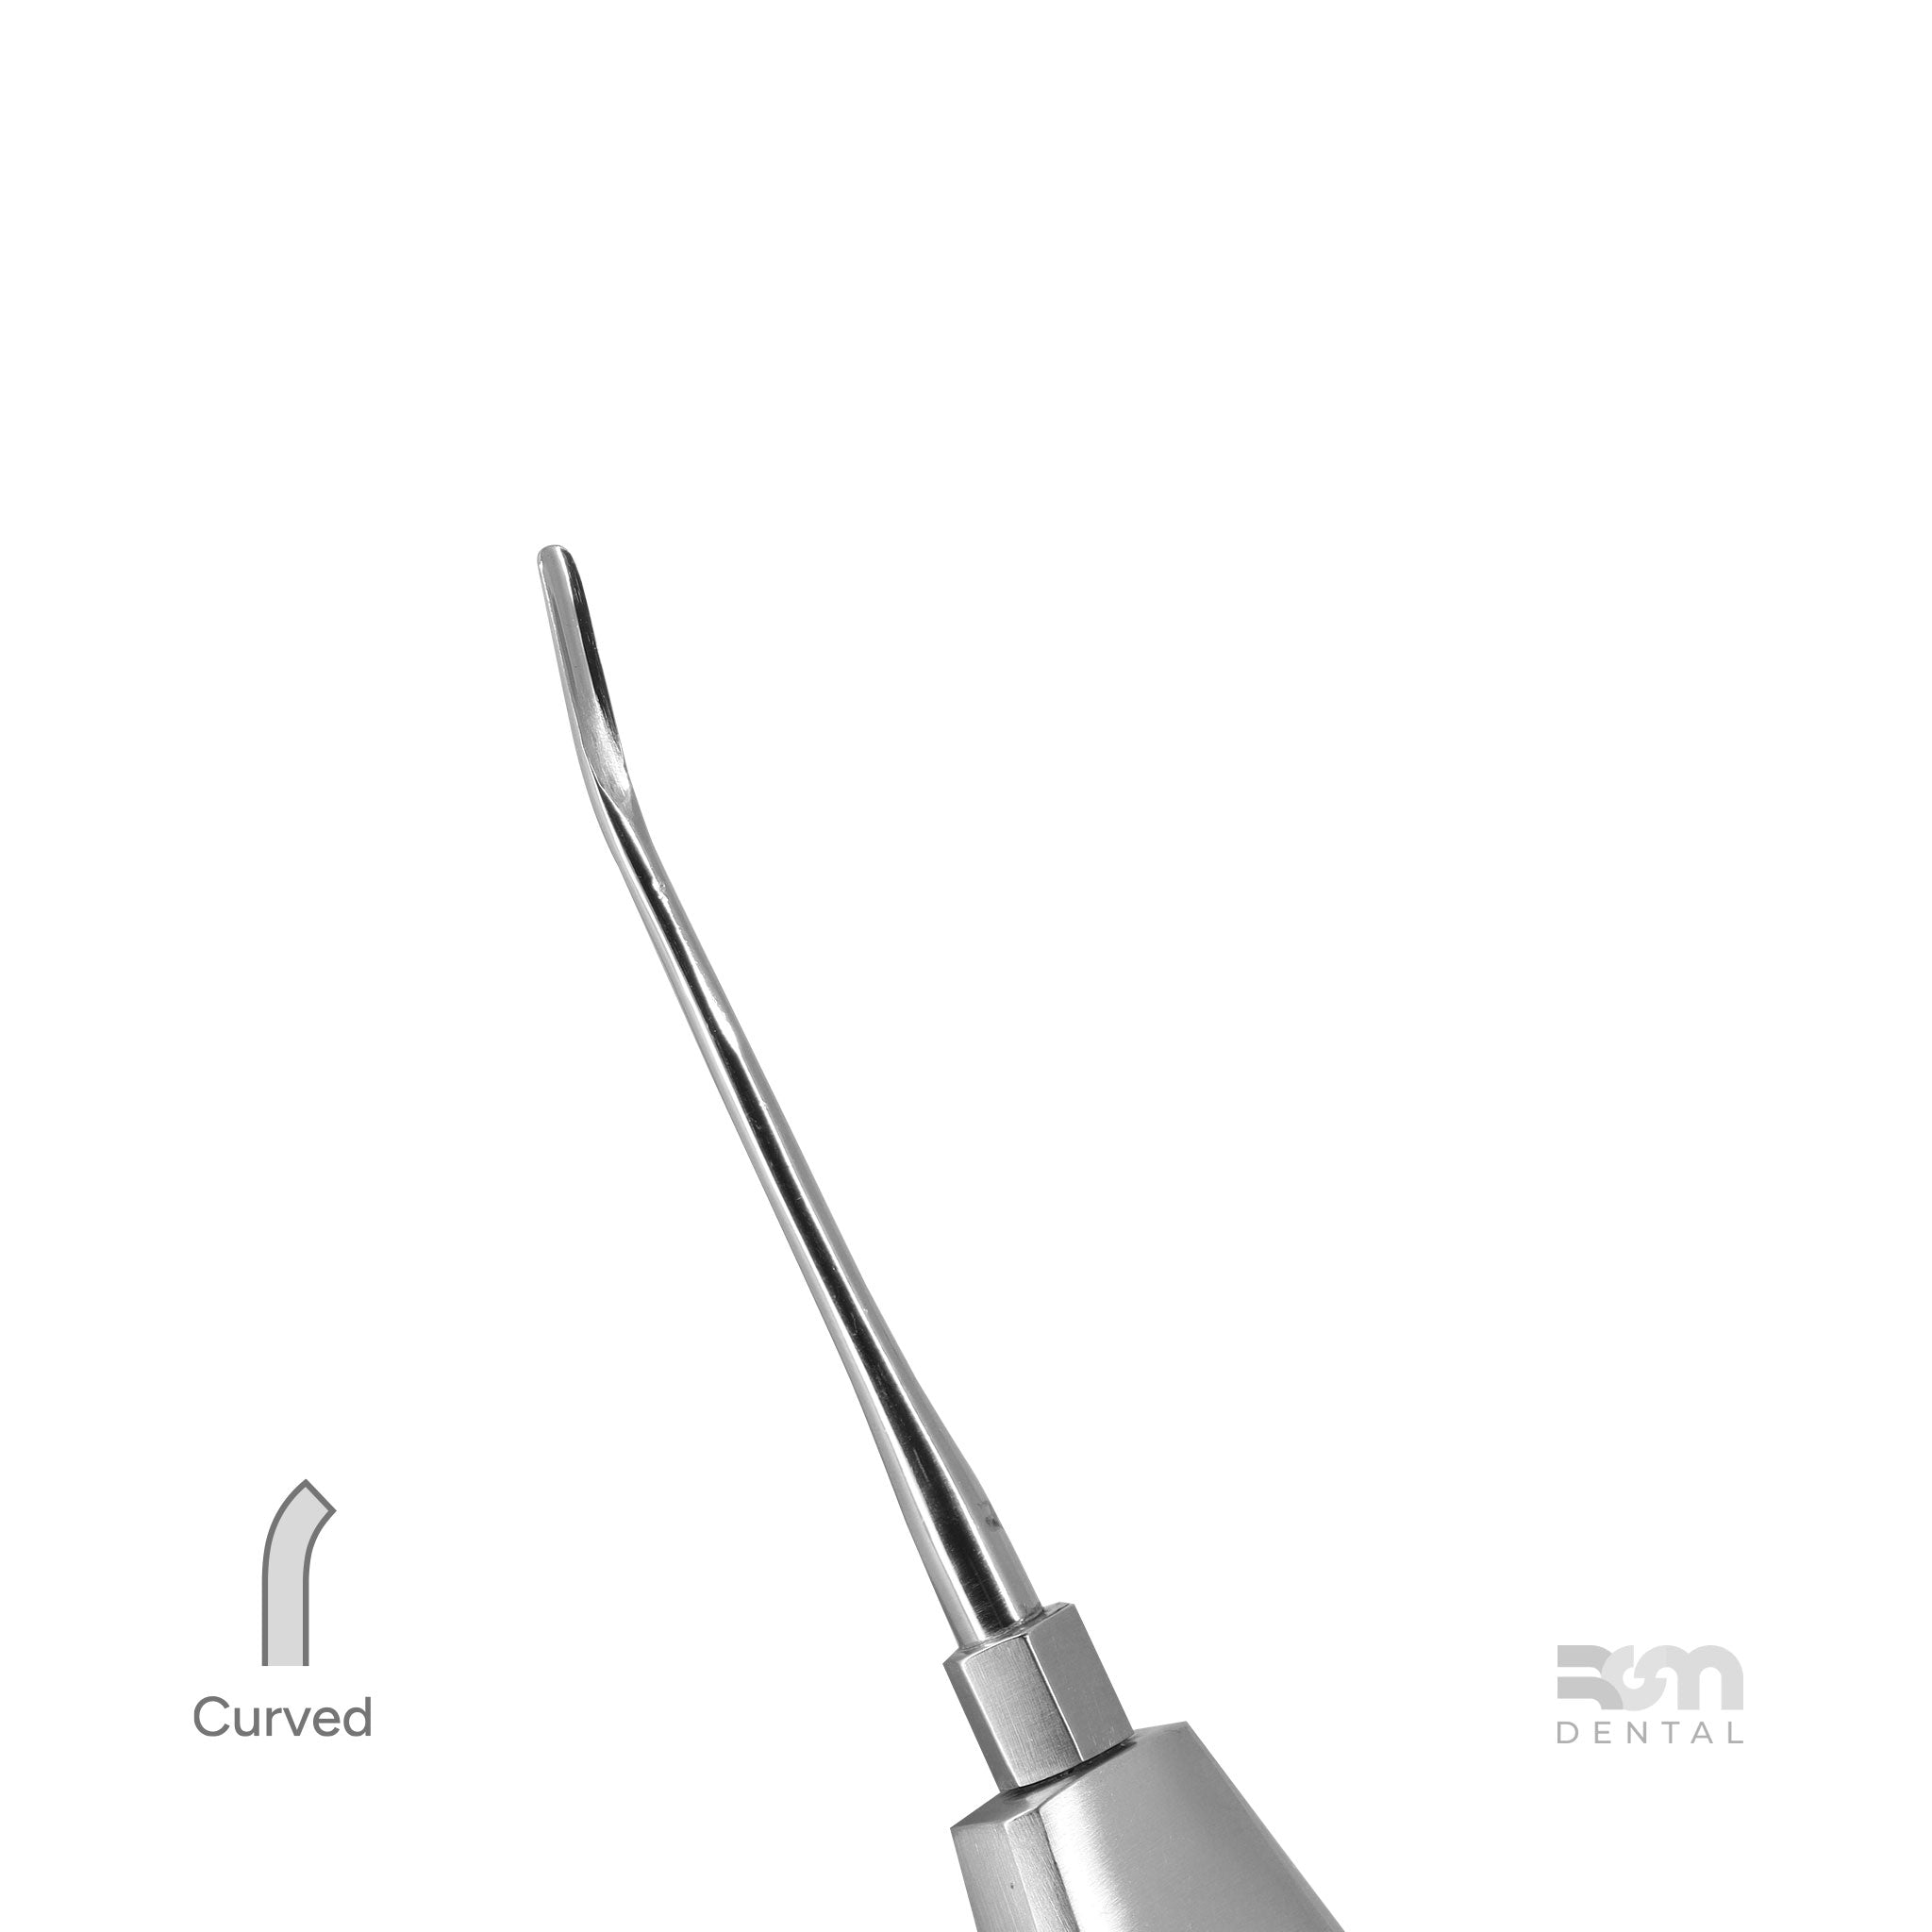 Luxator LUX-01 : Curved 3.0mm